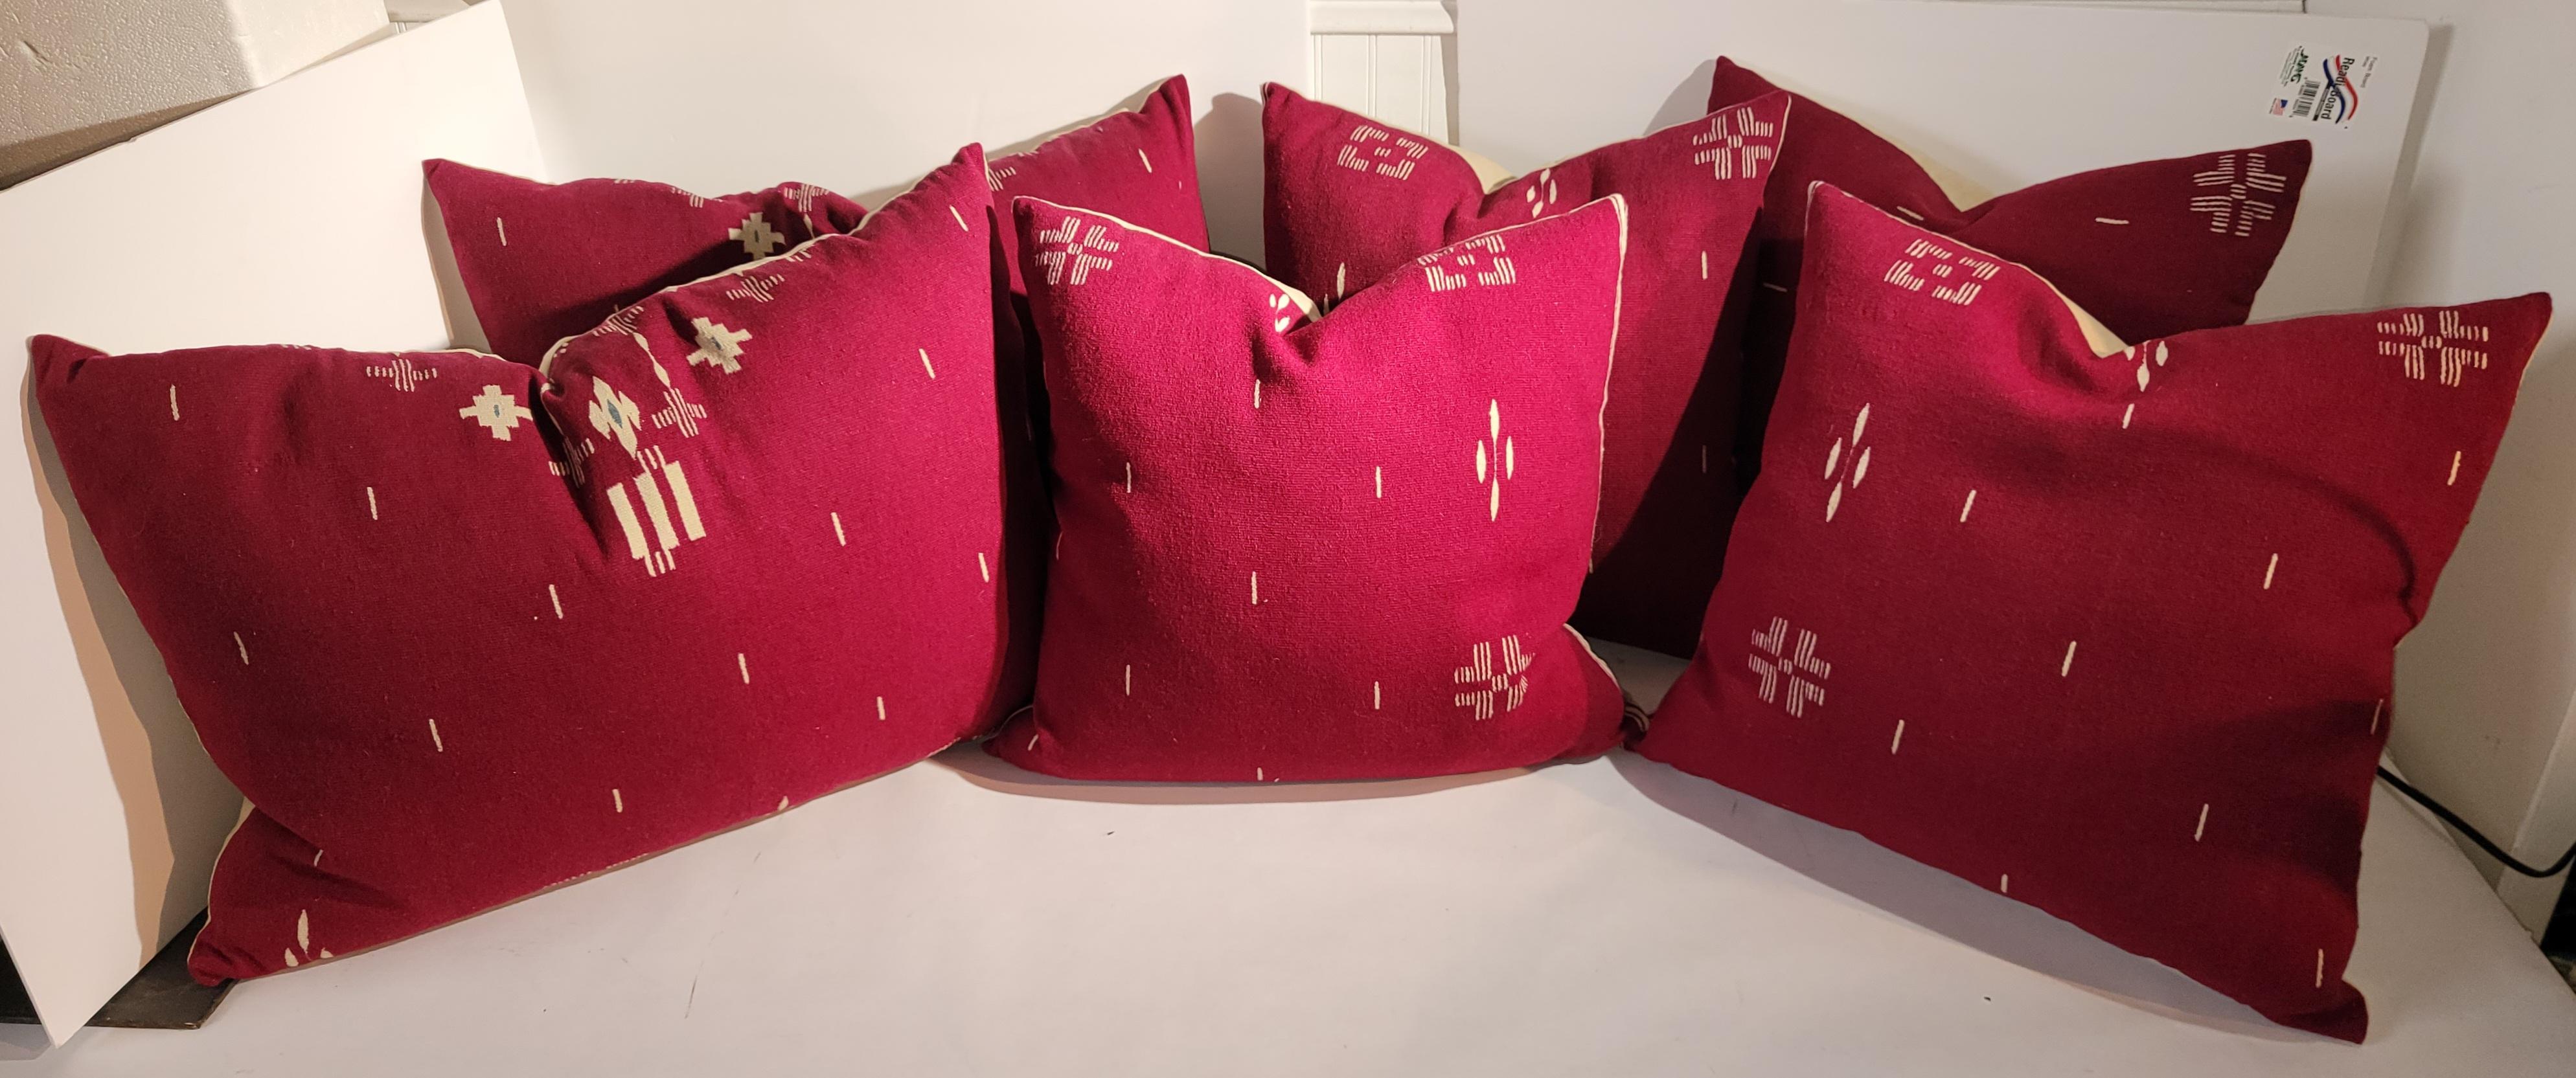 Wonderful Magenta Texcoco pillows. These attractive Texcoco pillows have been professionally laundered and are filled with custom down and feather insert. Sold in Pairs.